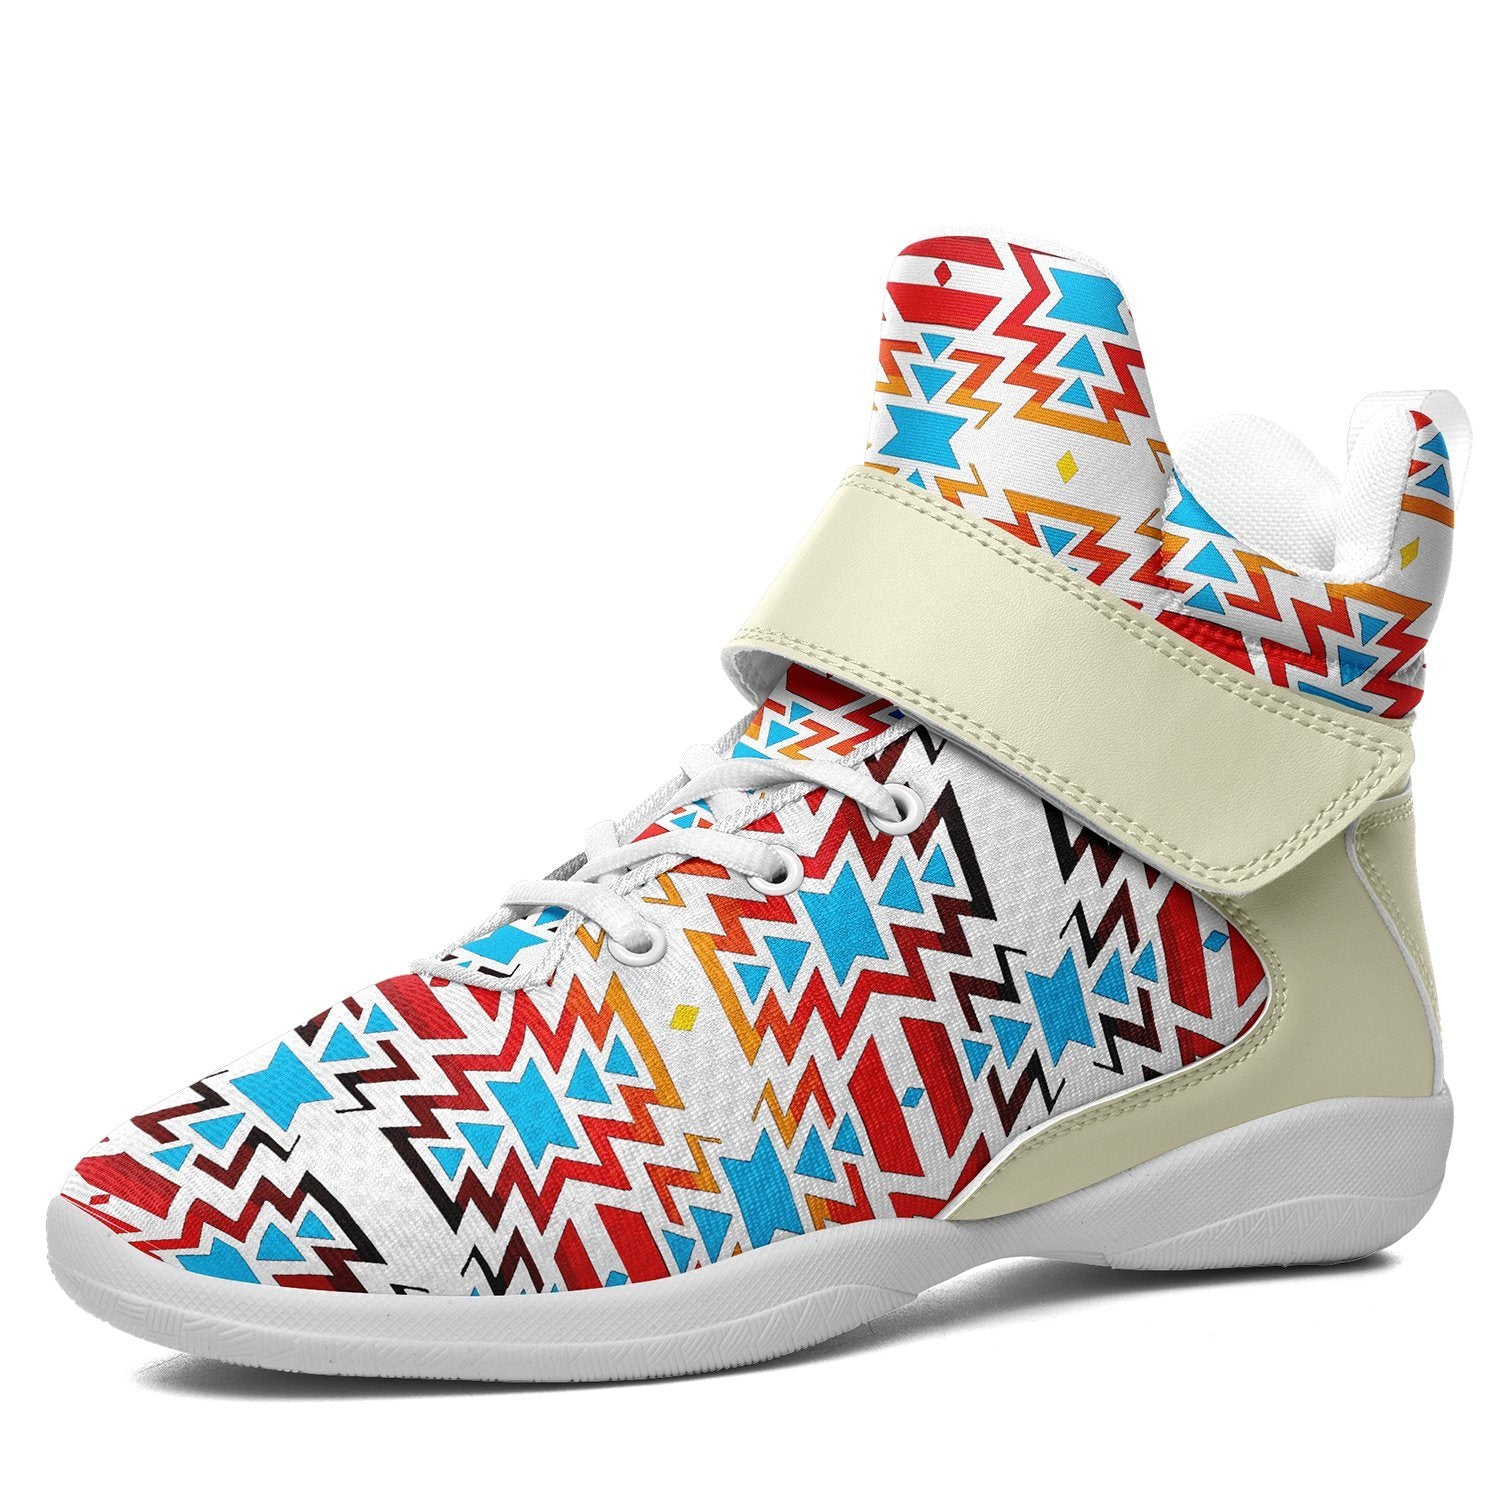 Fire Colors and Sky Ipottaa Basketball / Sport High Top Shoes 49 Dzine US Women 4.5 / US Youth 3.5 / EUR 35 White Sole with Cream Strap 